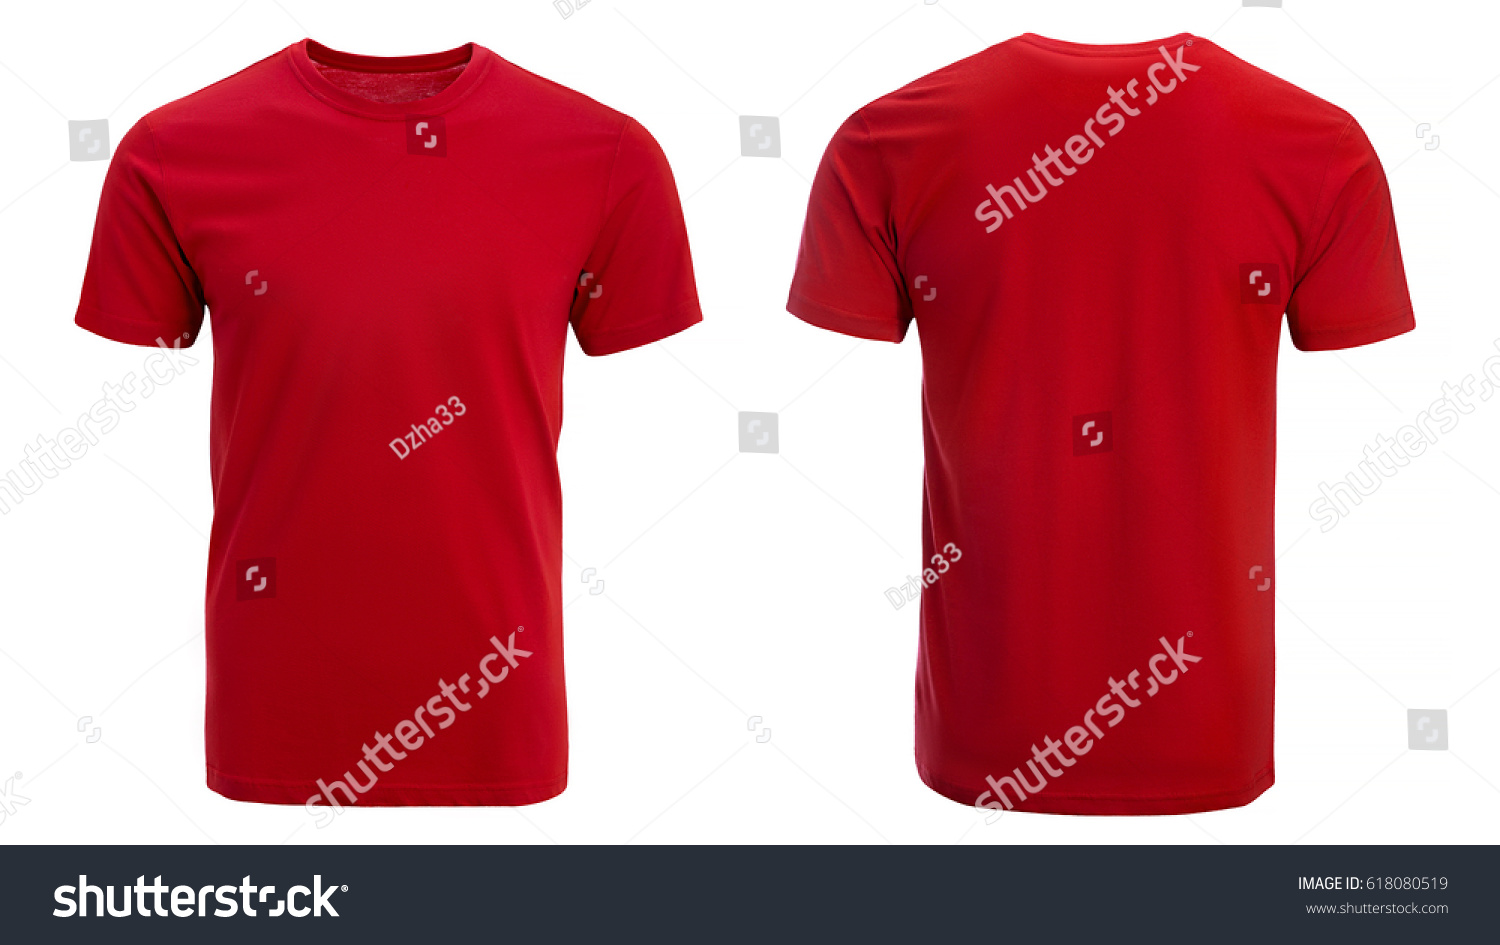 Red shirt front back Images, Stock Photos & Vectors | Shutterstock